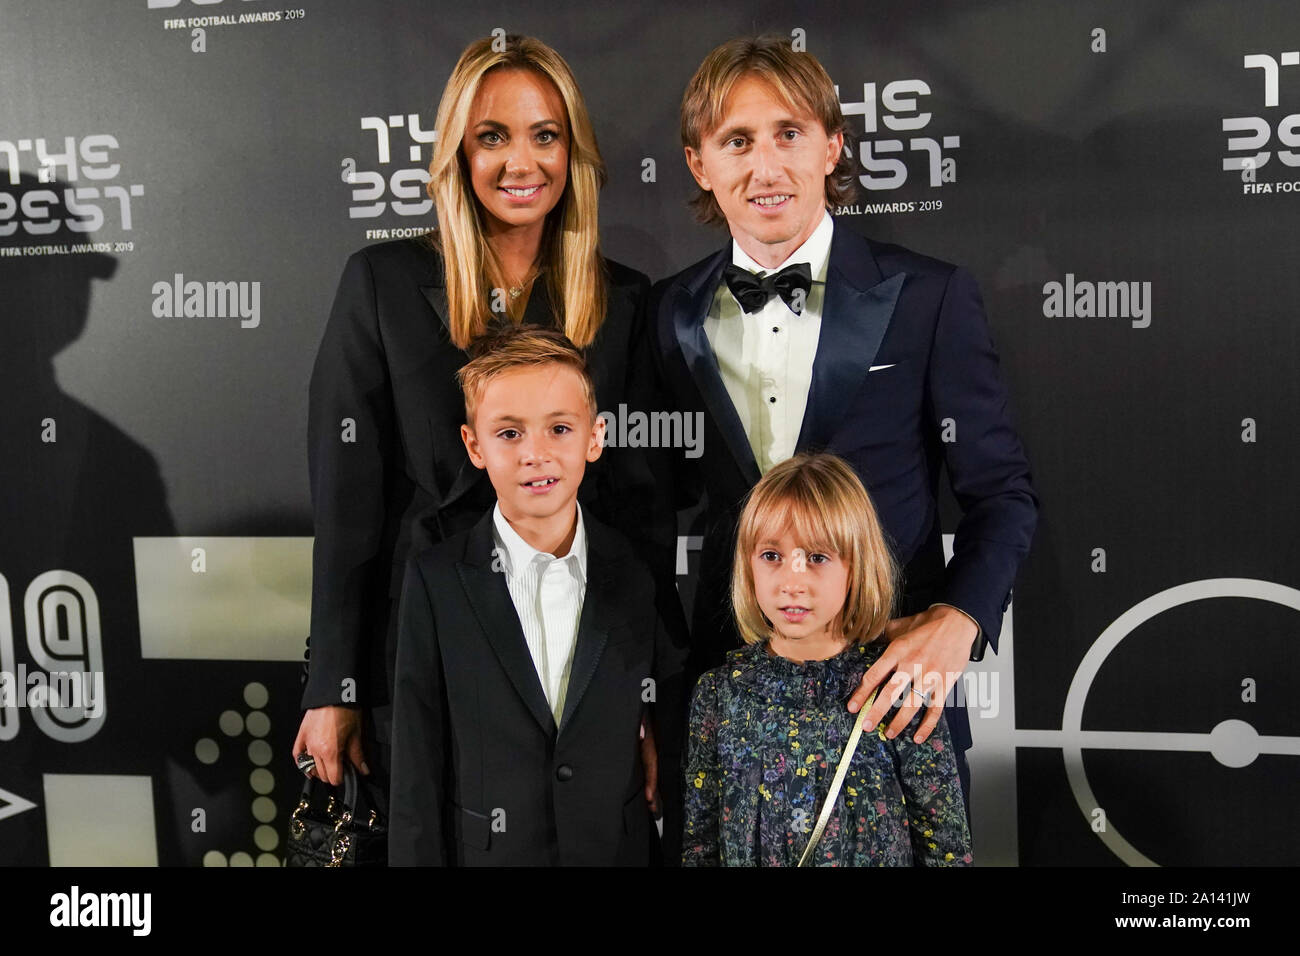 Milan, Italy. 23rd Sep 2019. Luka Modric a professional football player for Real Madrid and Crotia with his family on the green carpet during The Best FIFA Football Awards 2019 at the Teatro alla Scala, on September 23, 2019 in Milan, Italy, (Photo: Daniela Porcelli) Credit: Sport Press Photo/Alamy Live News Stock Photo